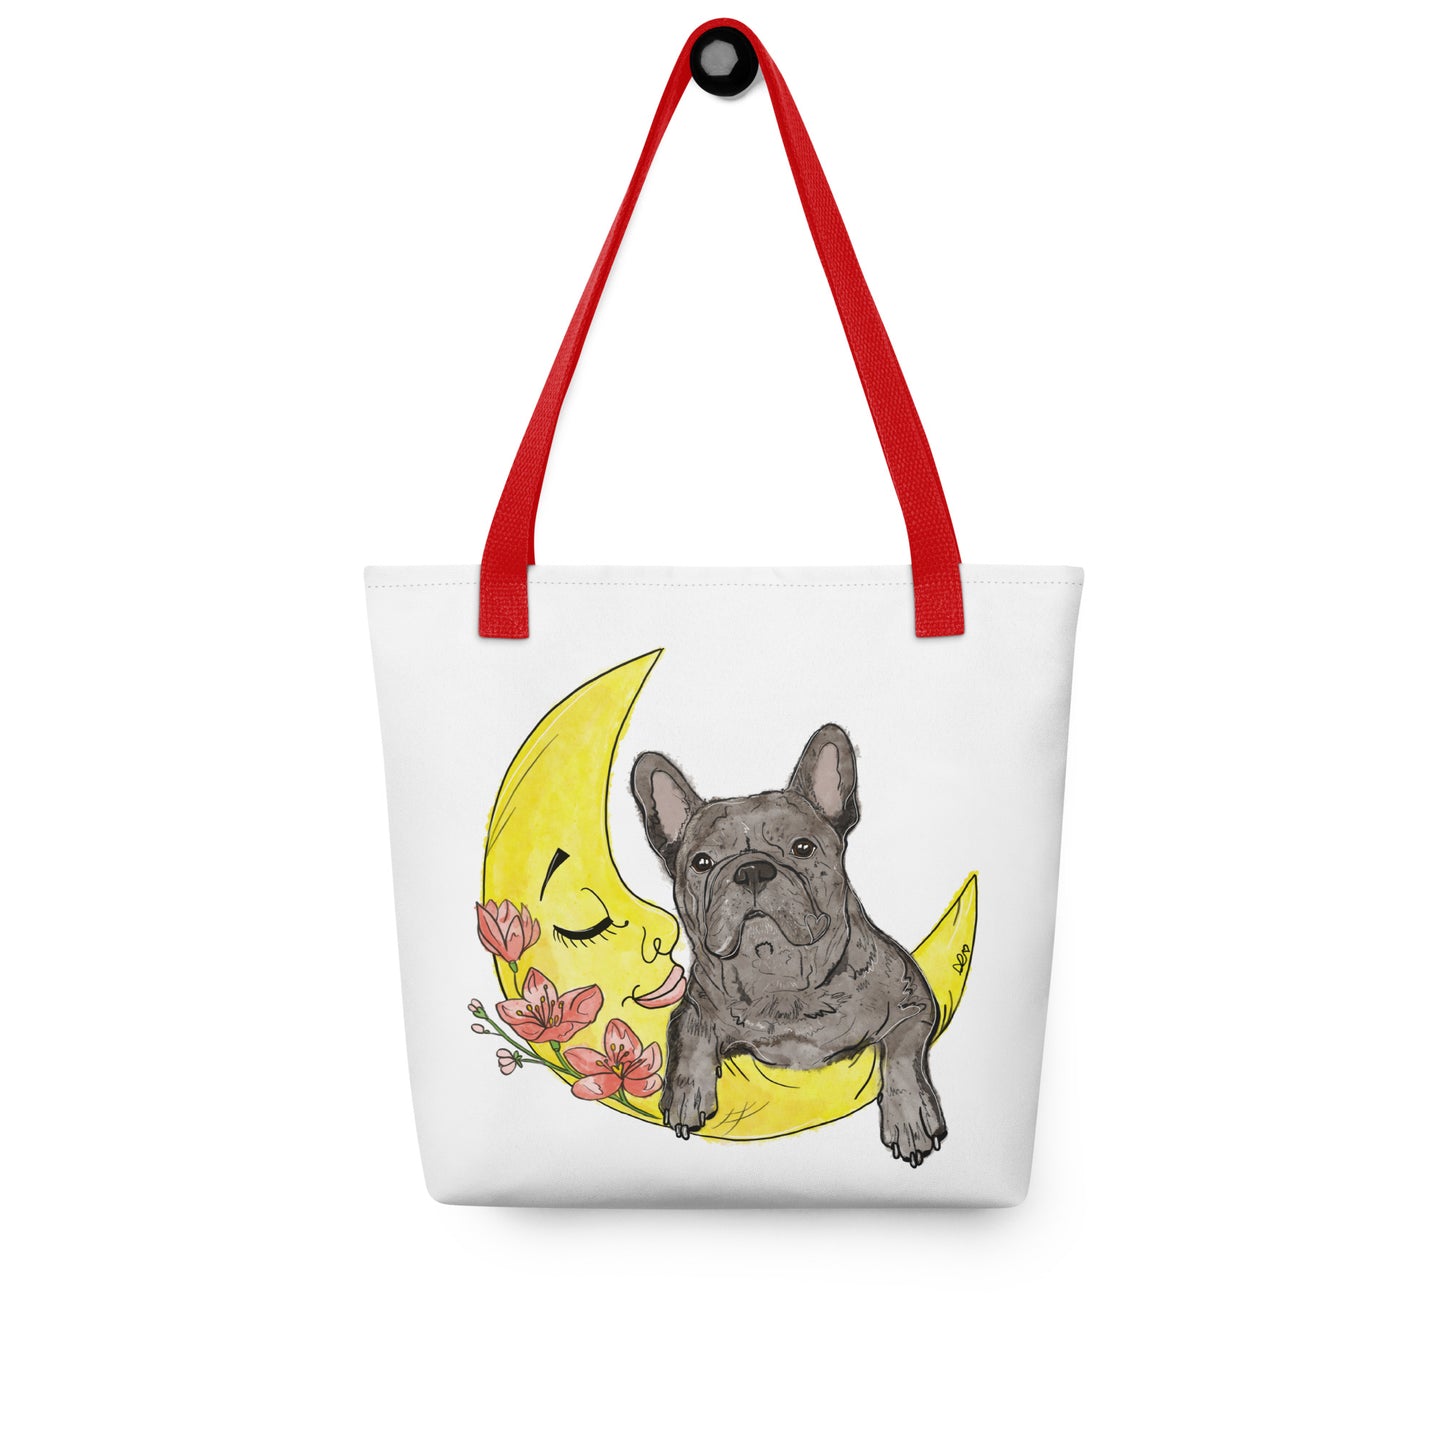 Lorienn Pet Snaps Tasche "love you to the moon and back" mit Frenchie Danny mit roten Griffen